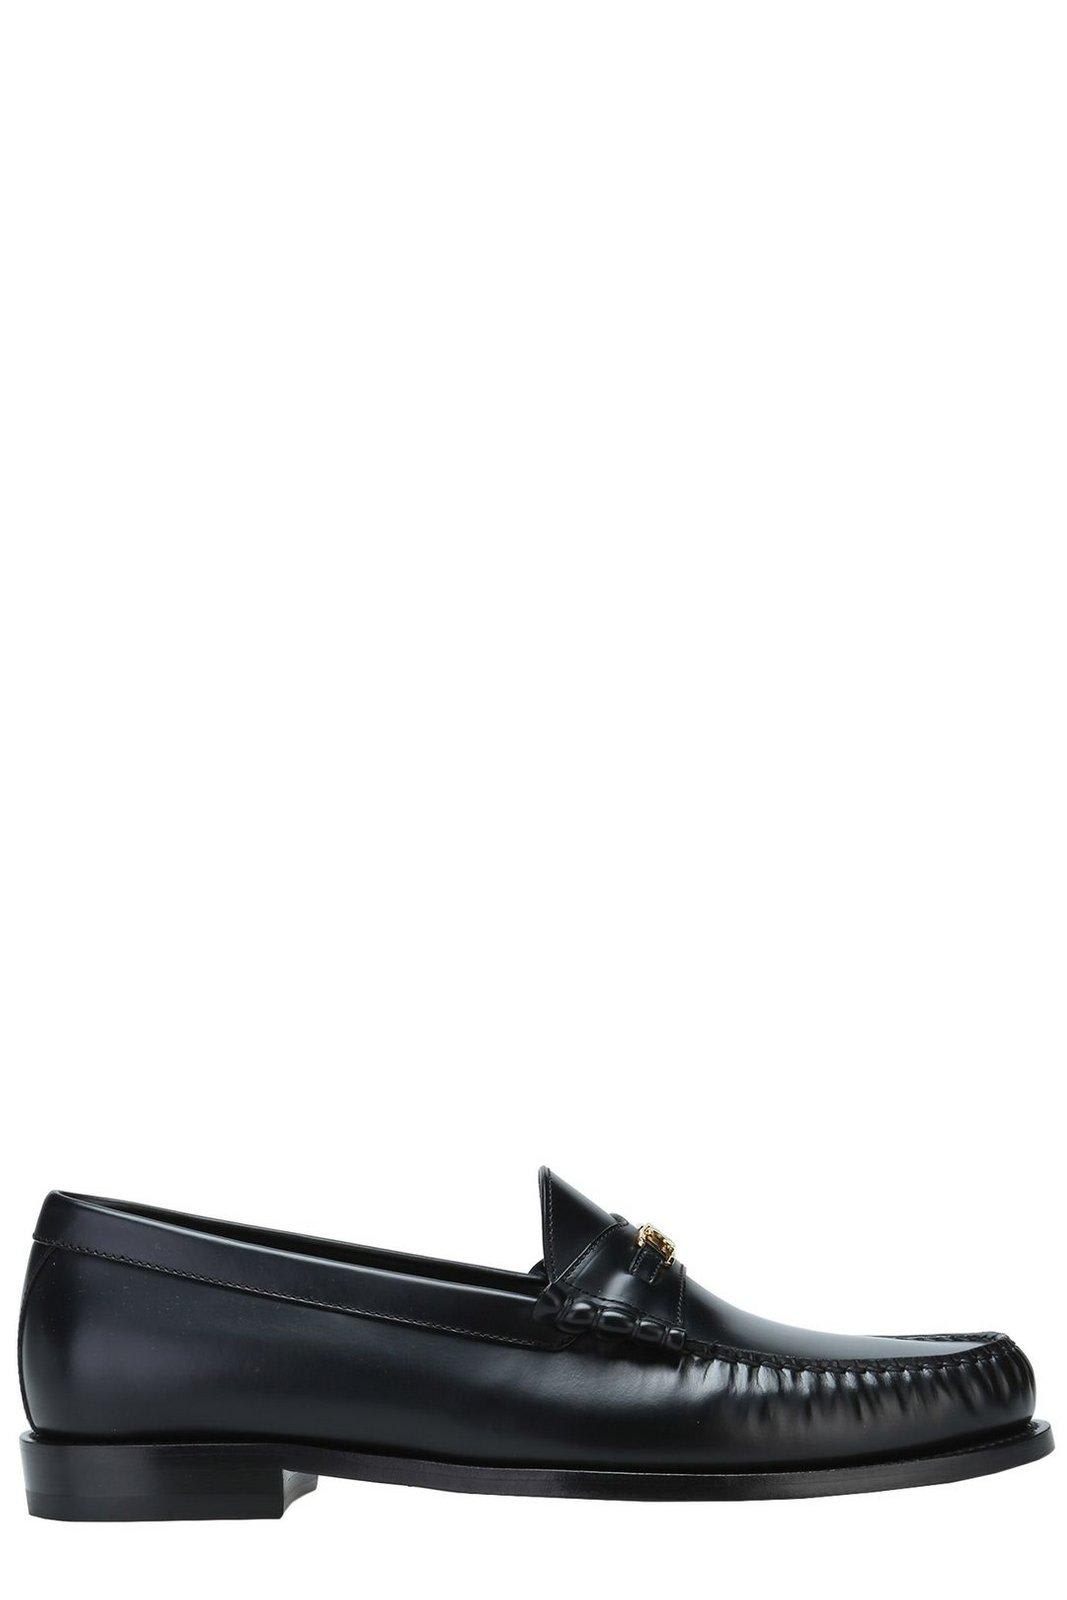 Celine Luco Triomphe Loafers